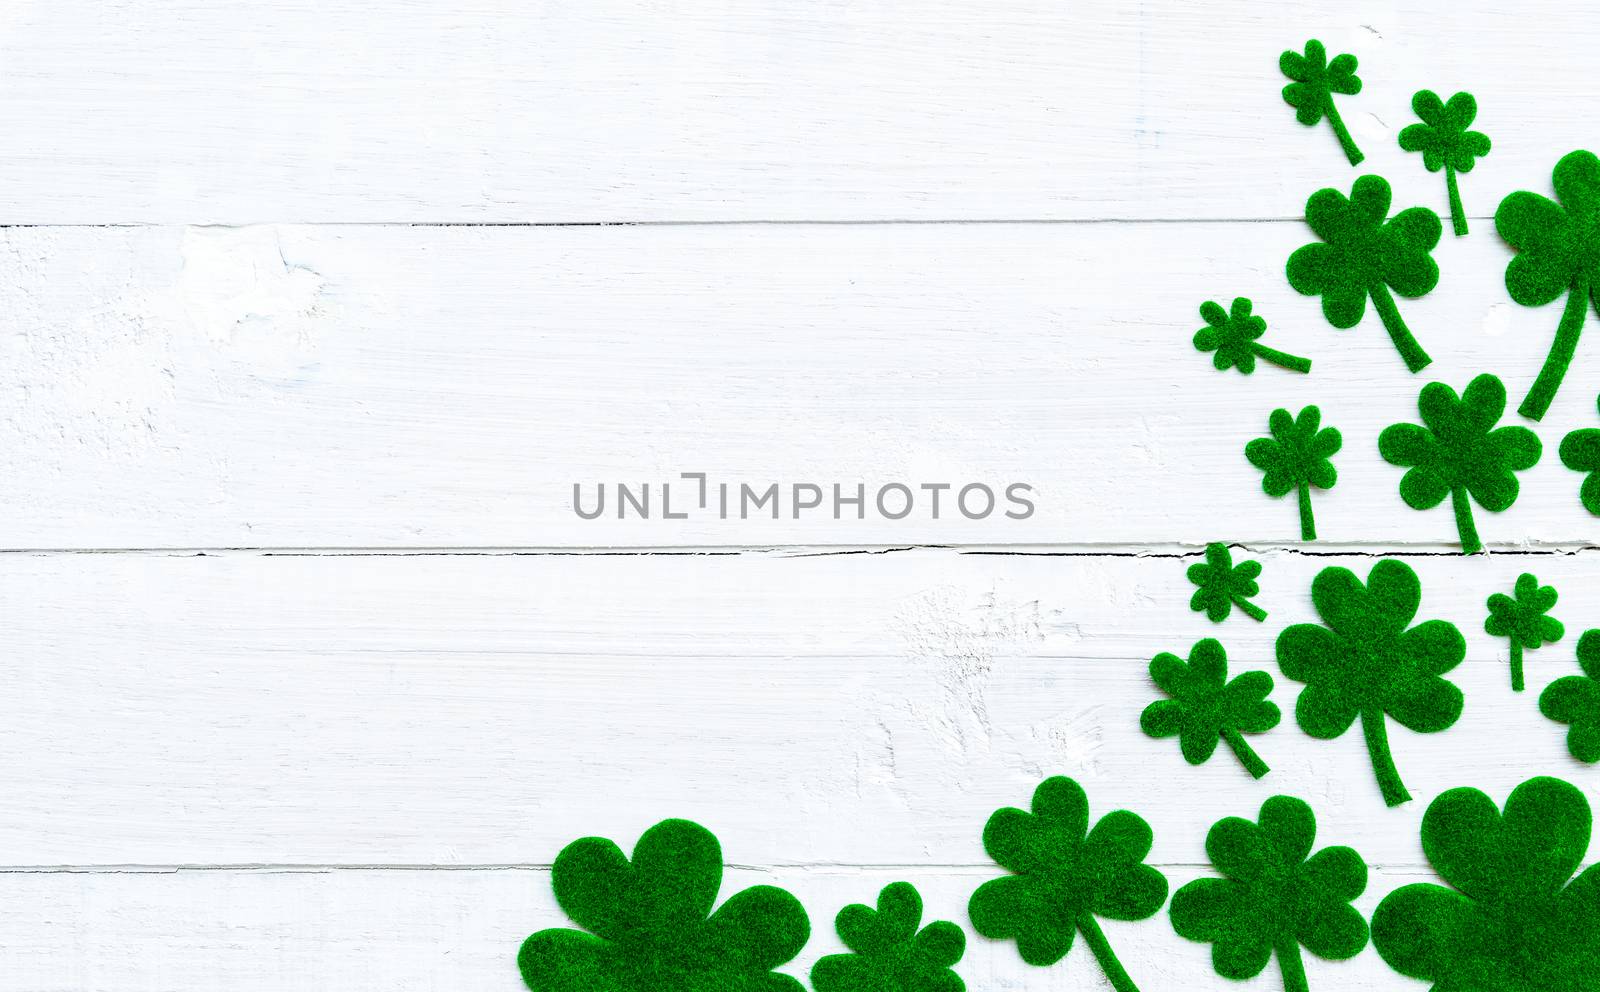 Happy St Patricks Day message and a lot of green paper clover le by spukkato